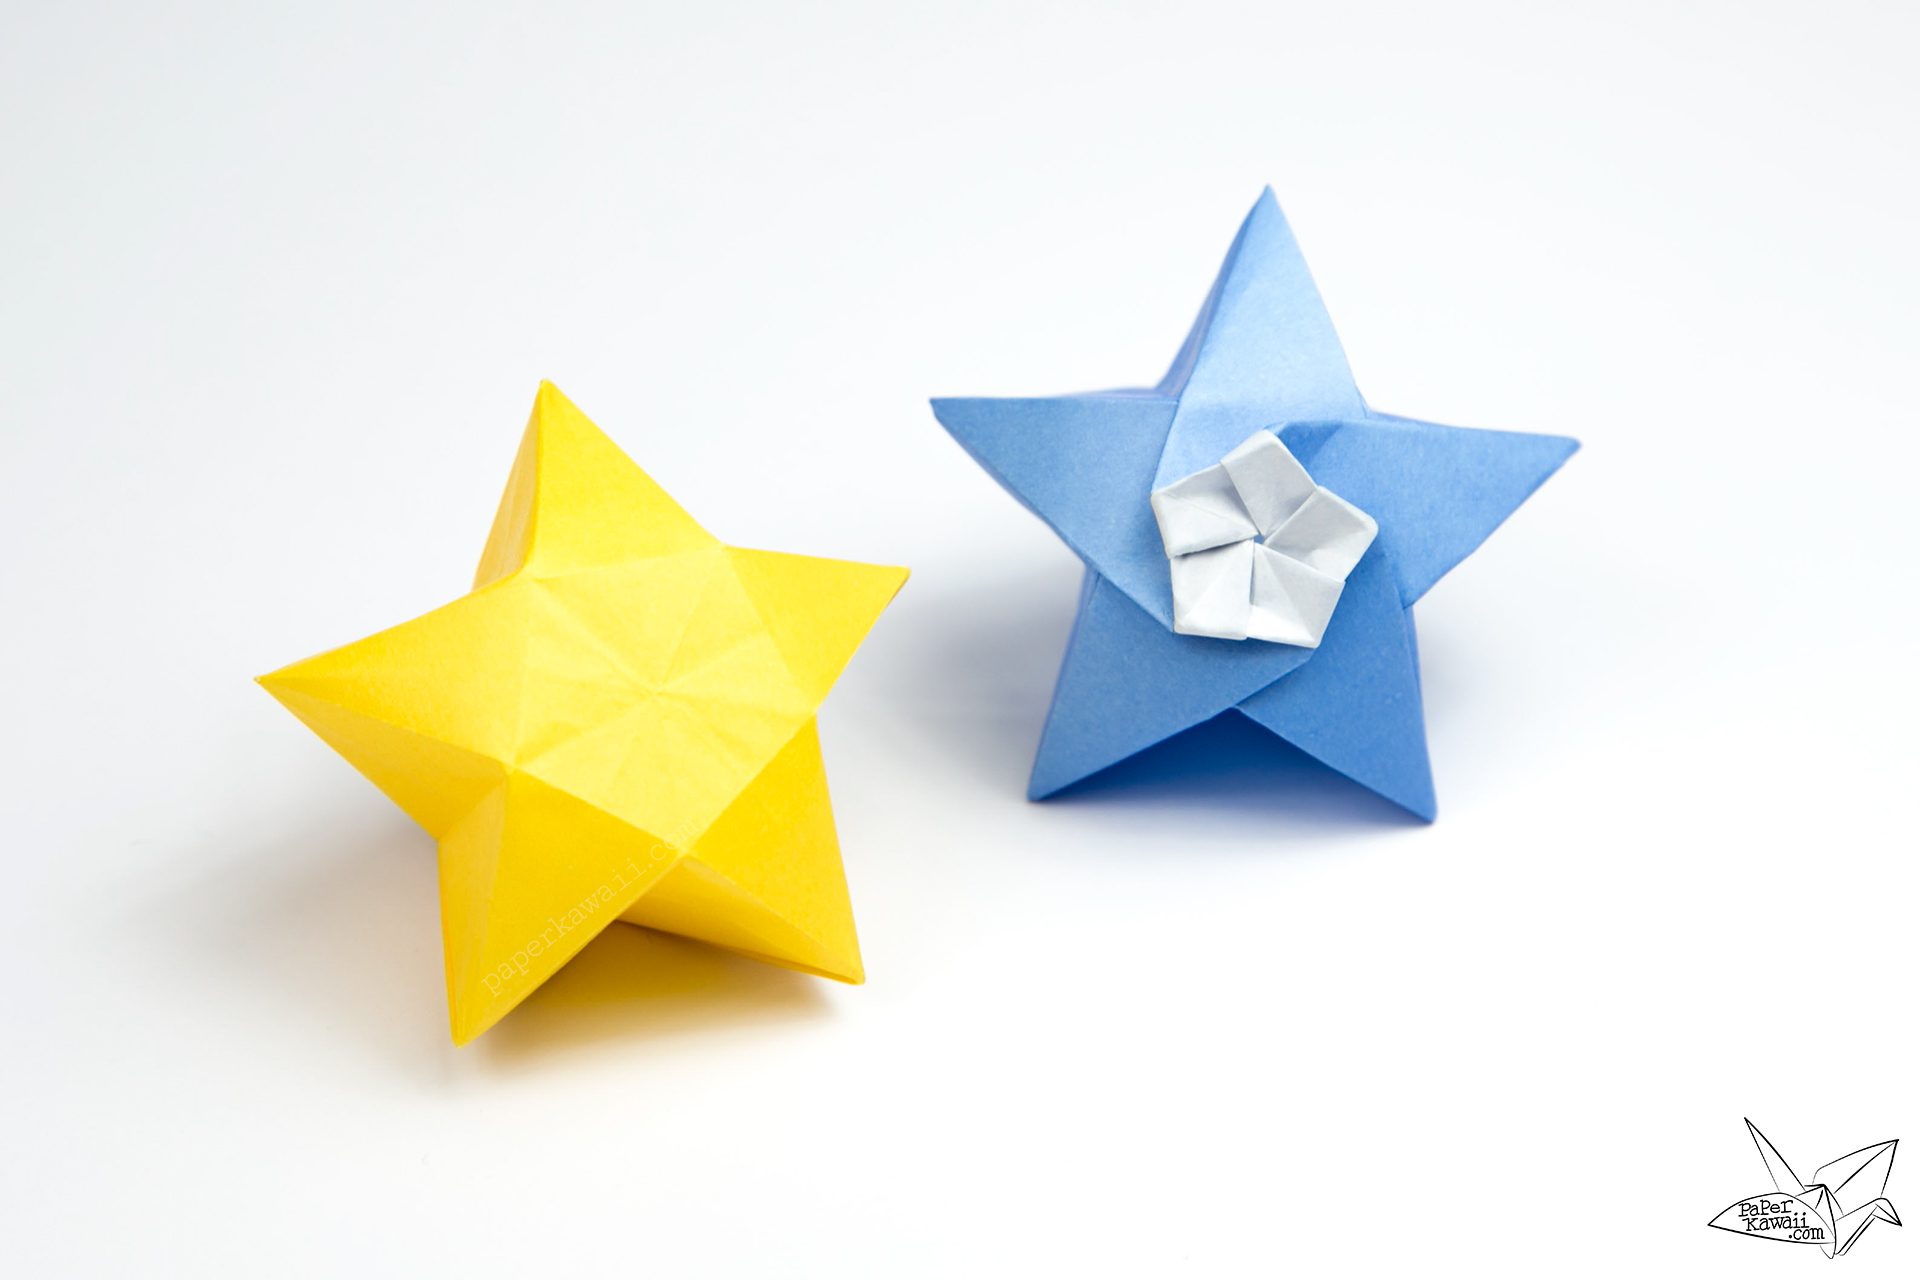 Origami Paper Star Tutorial, Learn how to fold a paper star in this cute origami  paper star tutorial. Follow the step by step paper folding instructions for  this easy origami paper